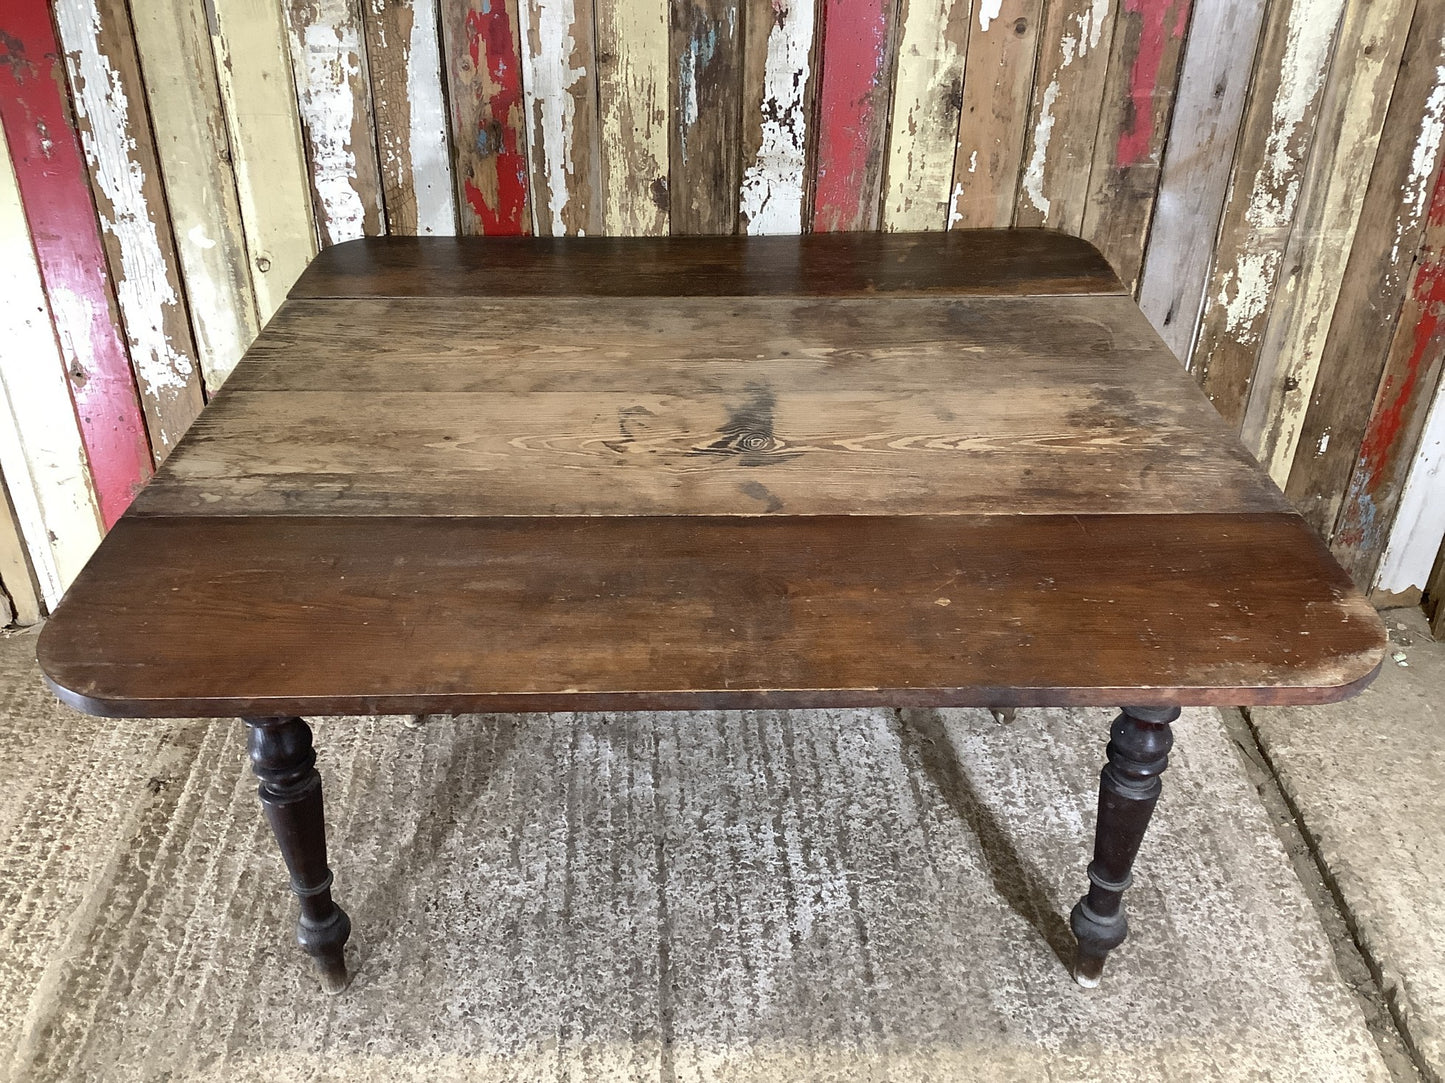 Victorian Stained Pitch Pine Drop Leaf Table 4 Seater 3'11"Lx3'10"W